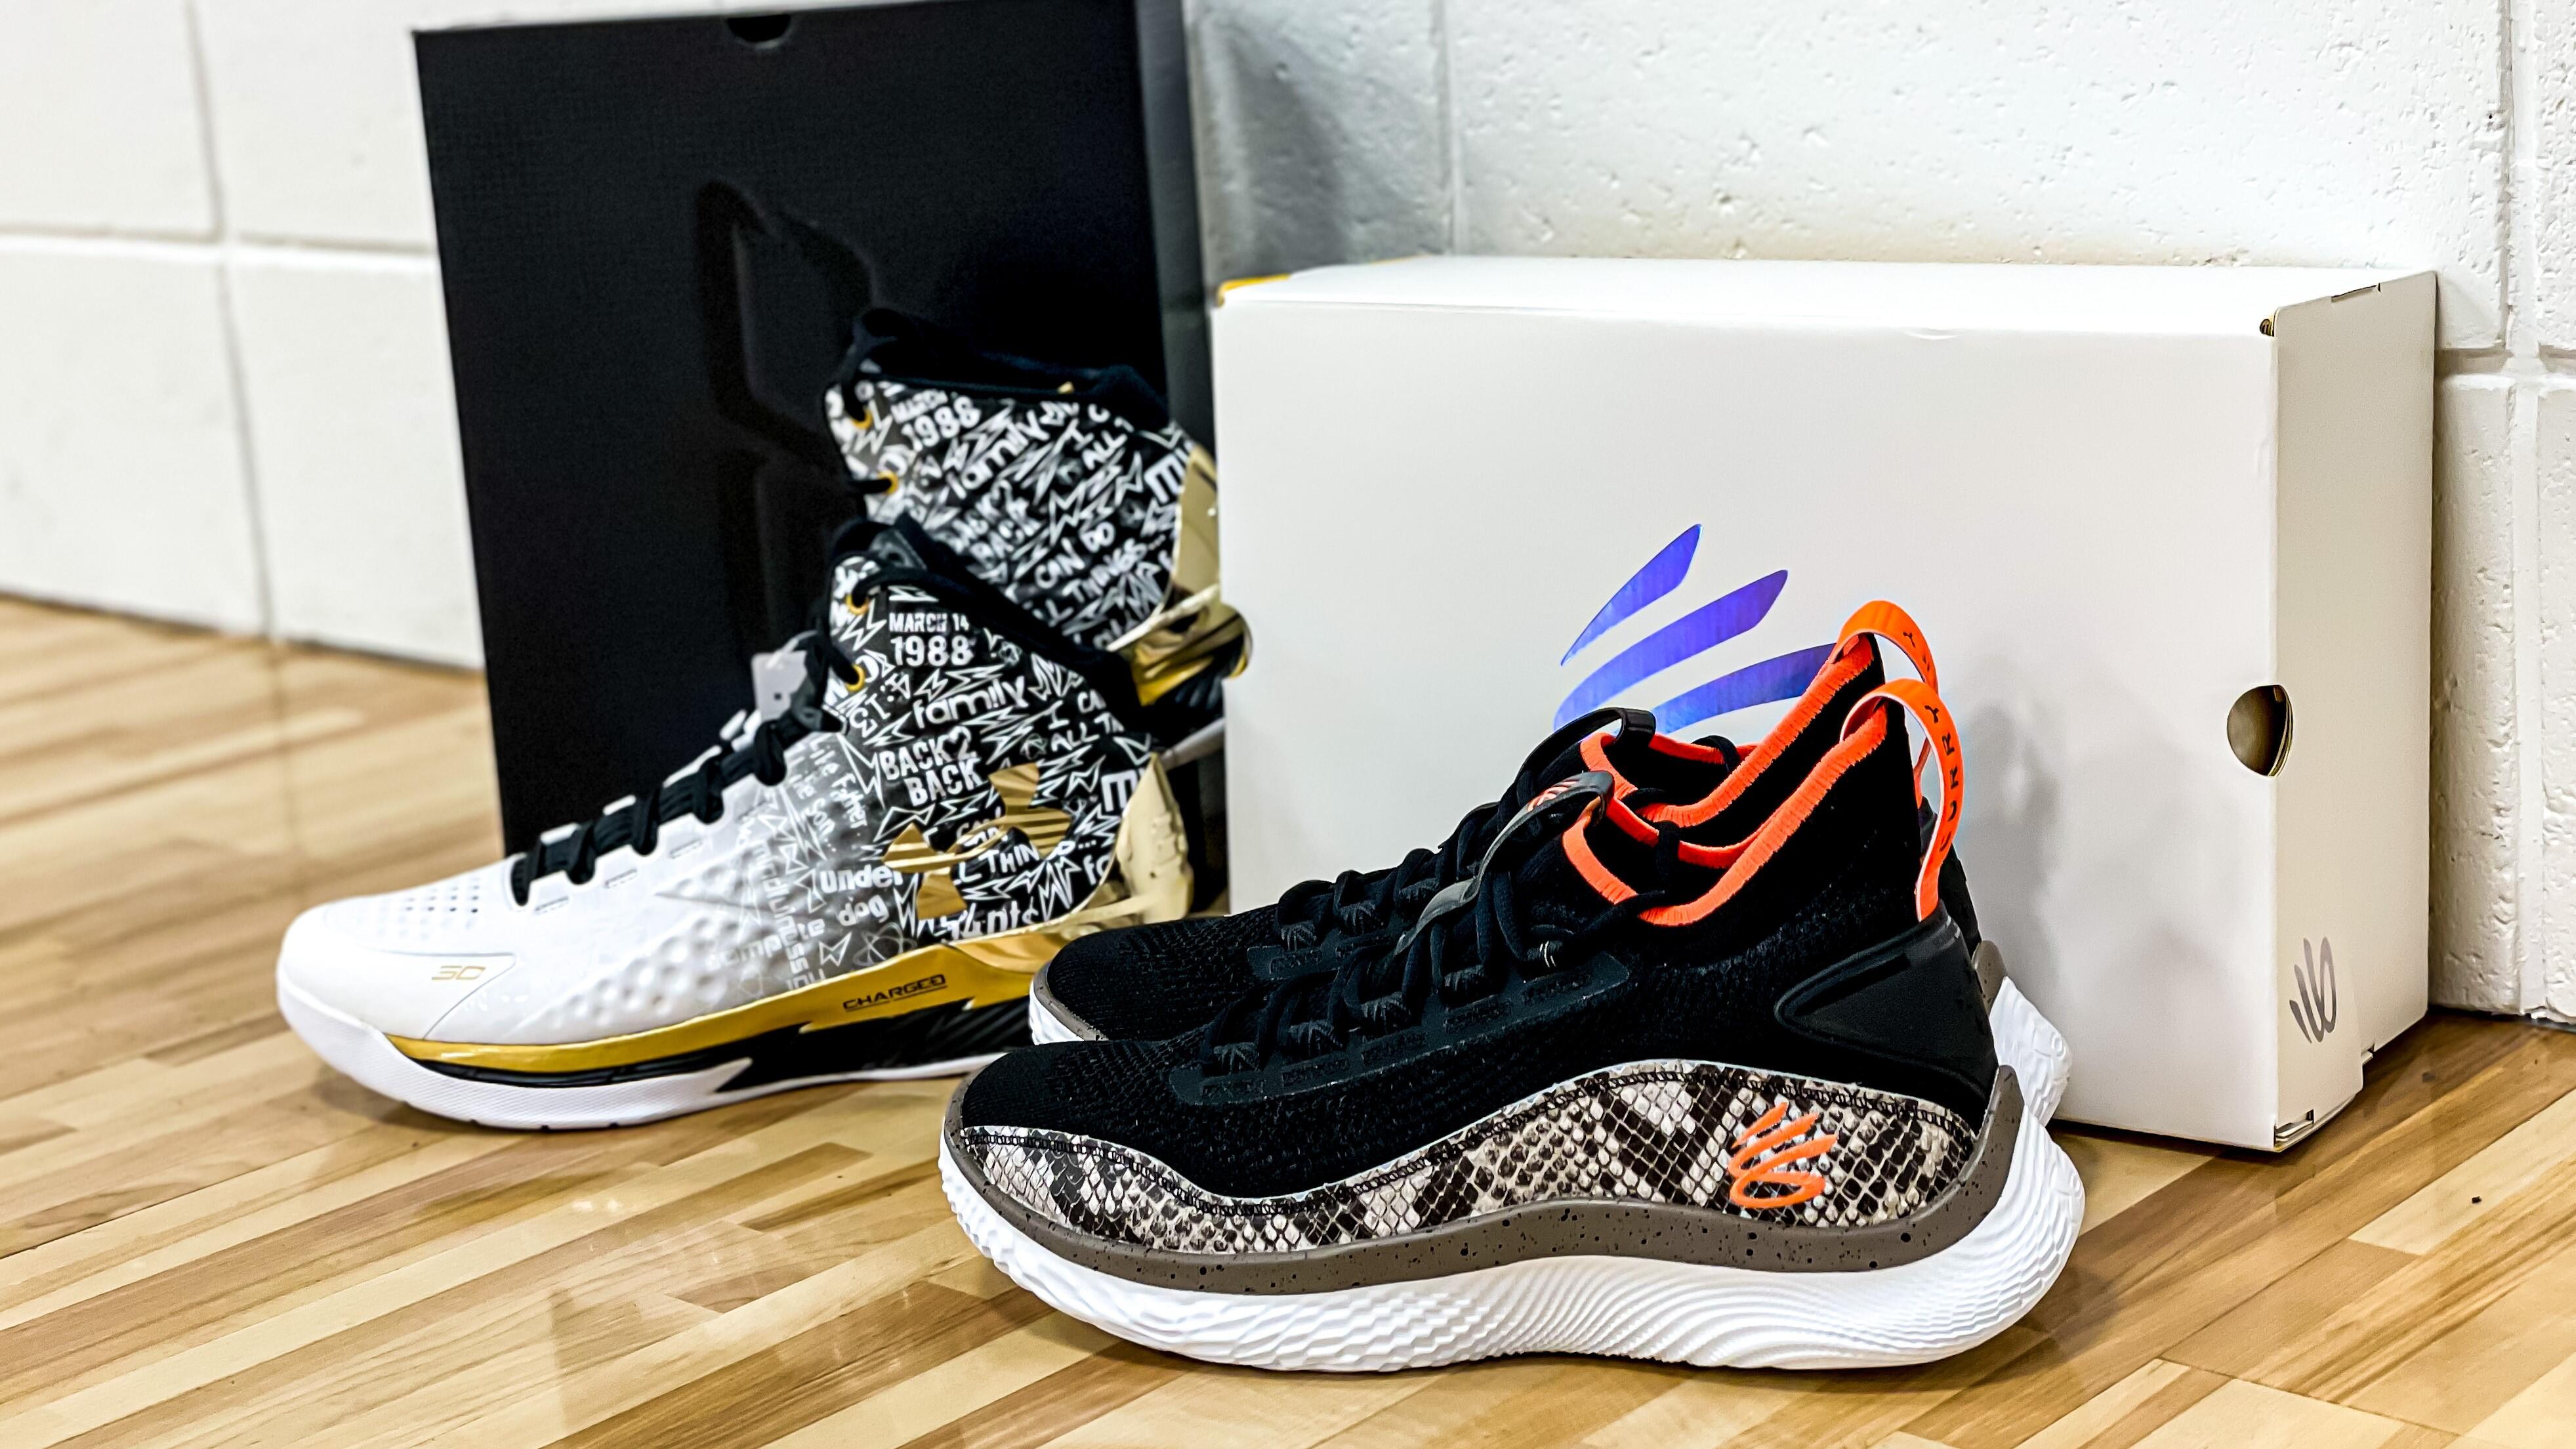 CURRY FLOW 8「STRIKEFLOW」/CURRY1 「B2B MVP1」同時販売！ UNDER ARMOUR BRAND HOUSE  新宿 SHOP BLOG UNDER ARMOUR（アンダーアーマー）